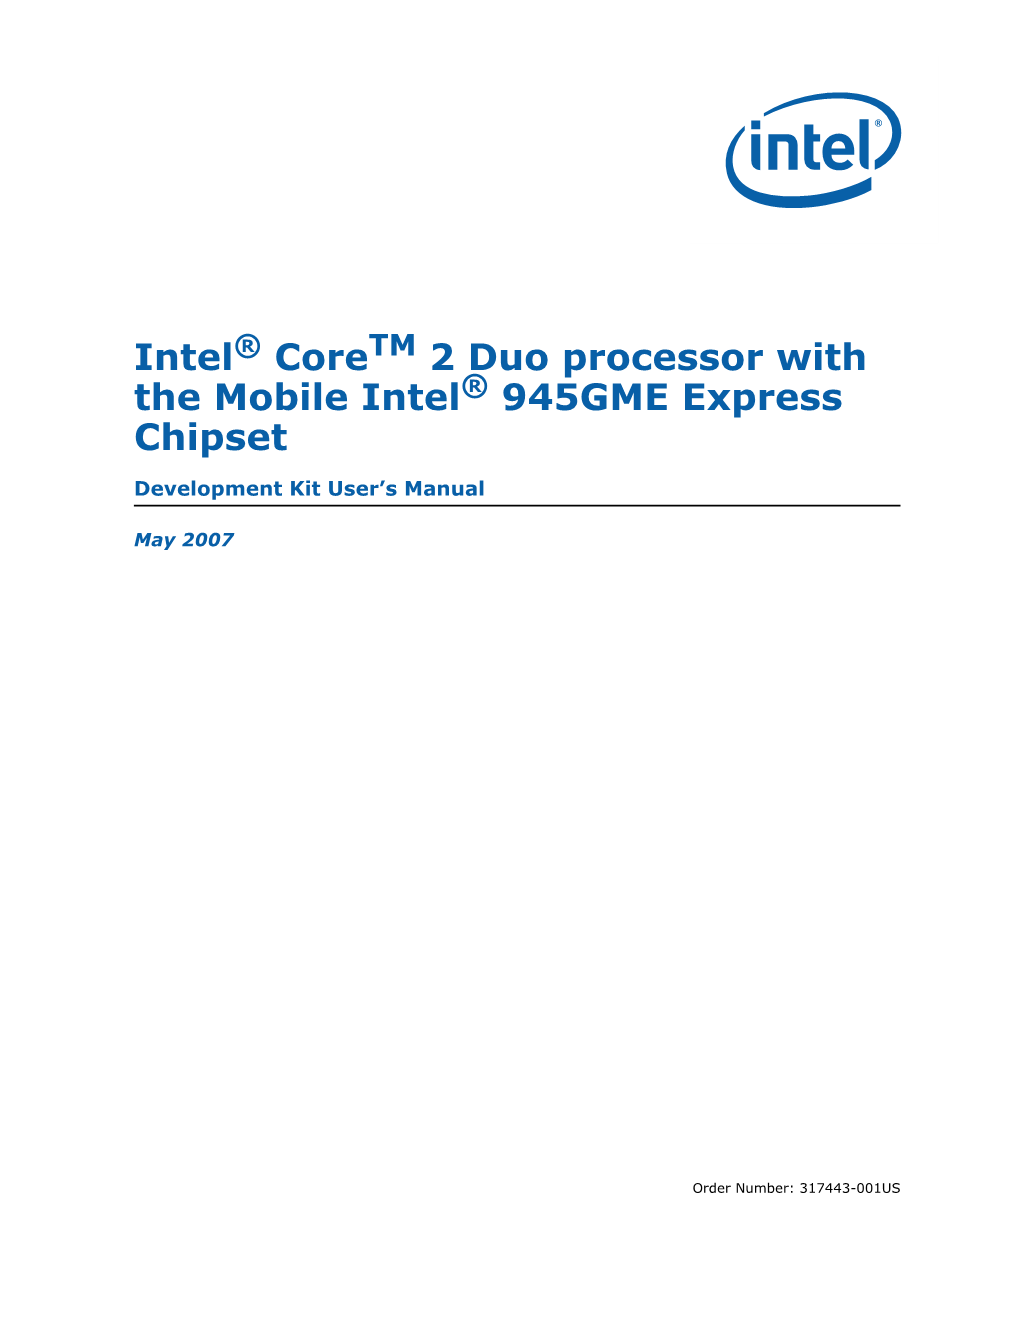 Intel Core 2 Duo Processor with the Mobile Intel 945GME Express Chipset